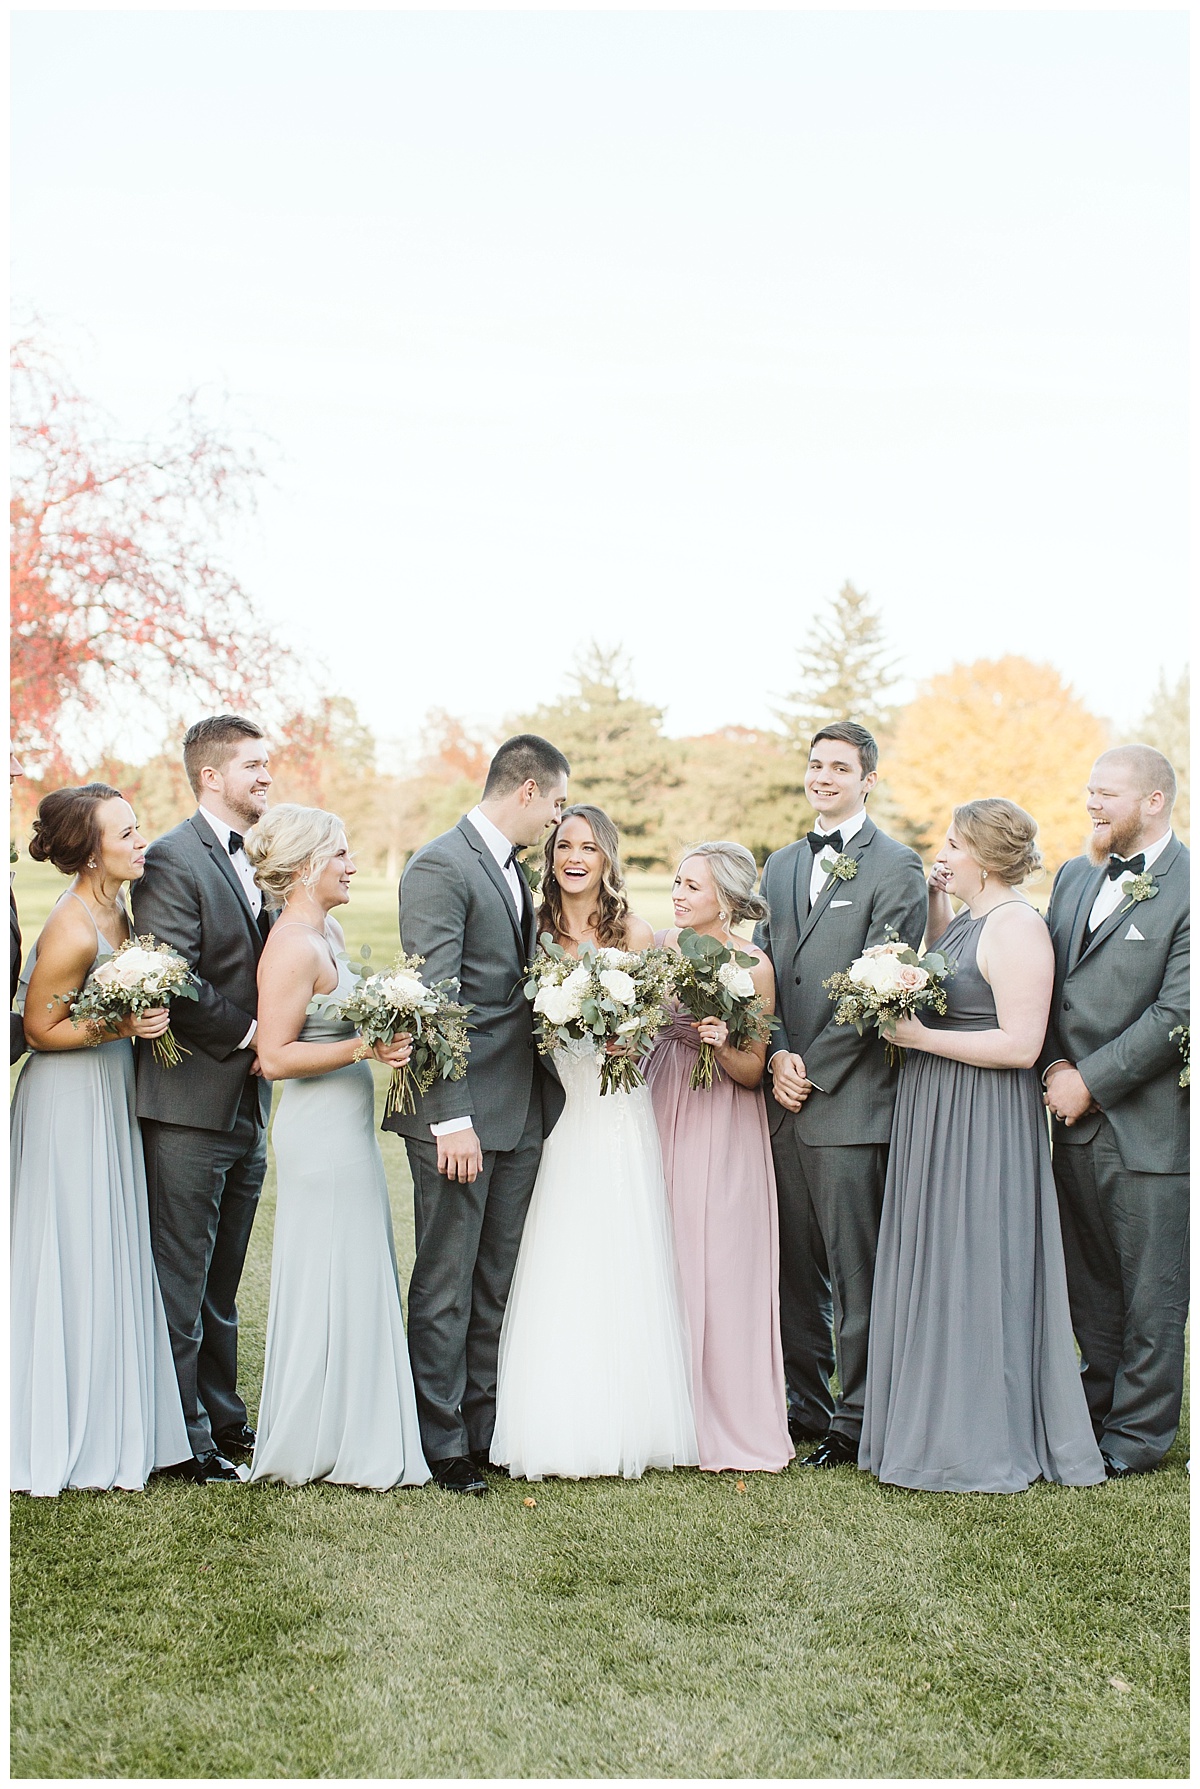 appleton, wisconsin, wedding, central wisconsin, photography, wausau, stevens point, butte des morts country club, wedding party, 